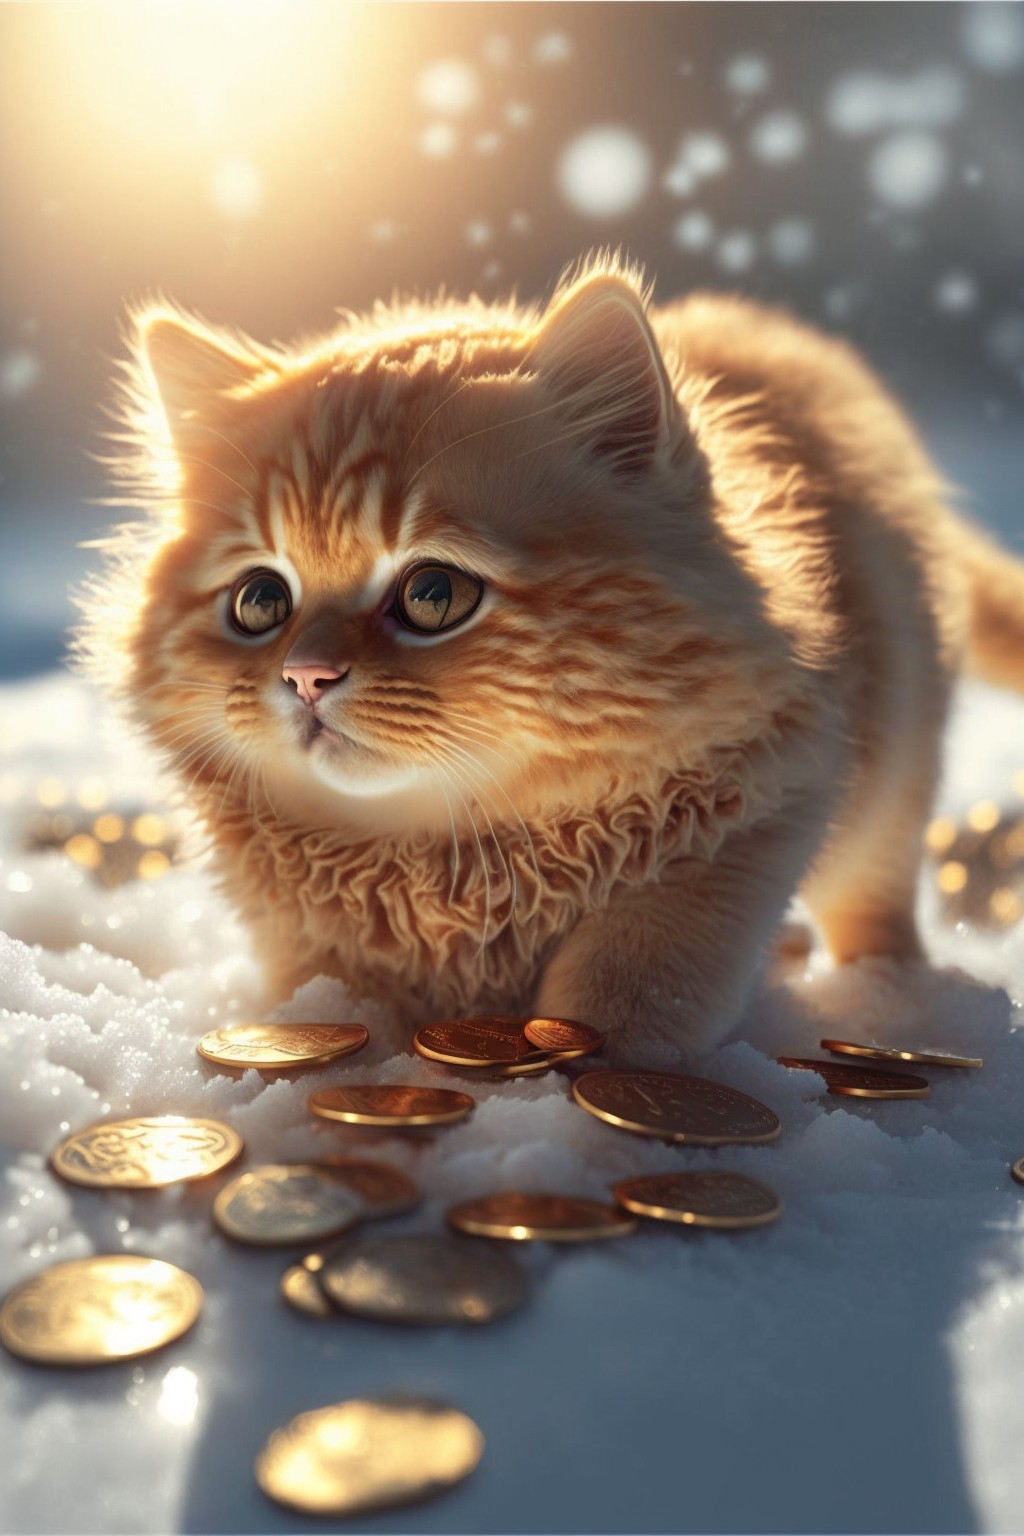 4 images of The super cute lucky cat who found gold coins by Midjourney